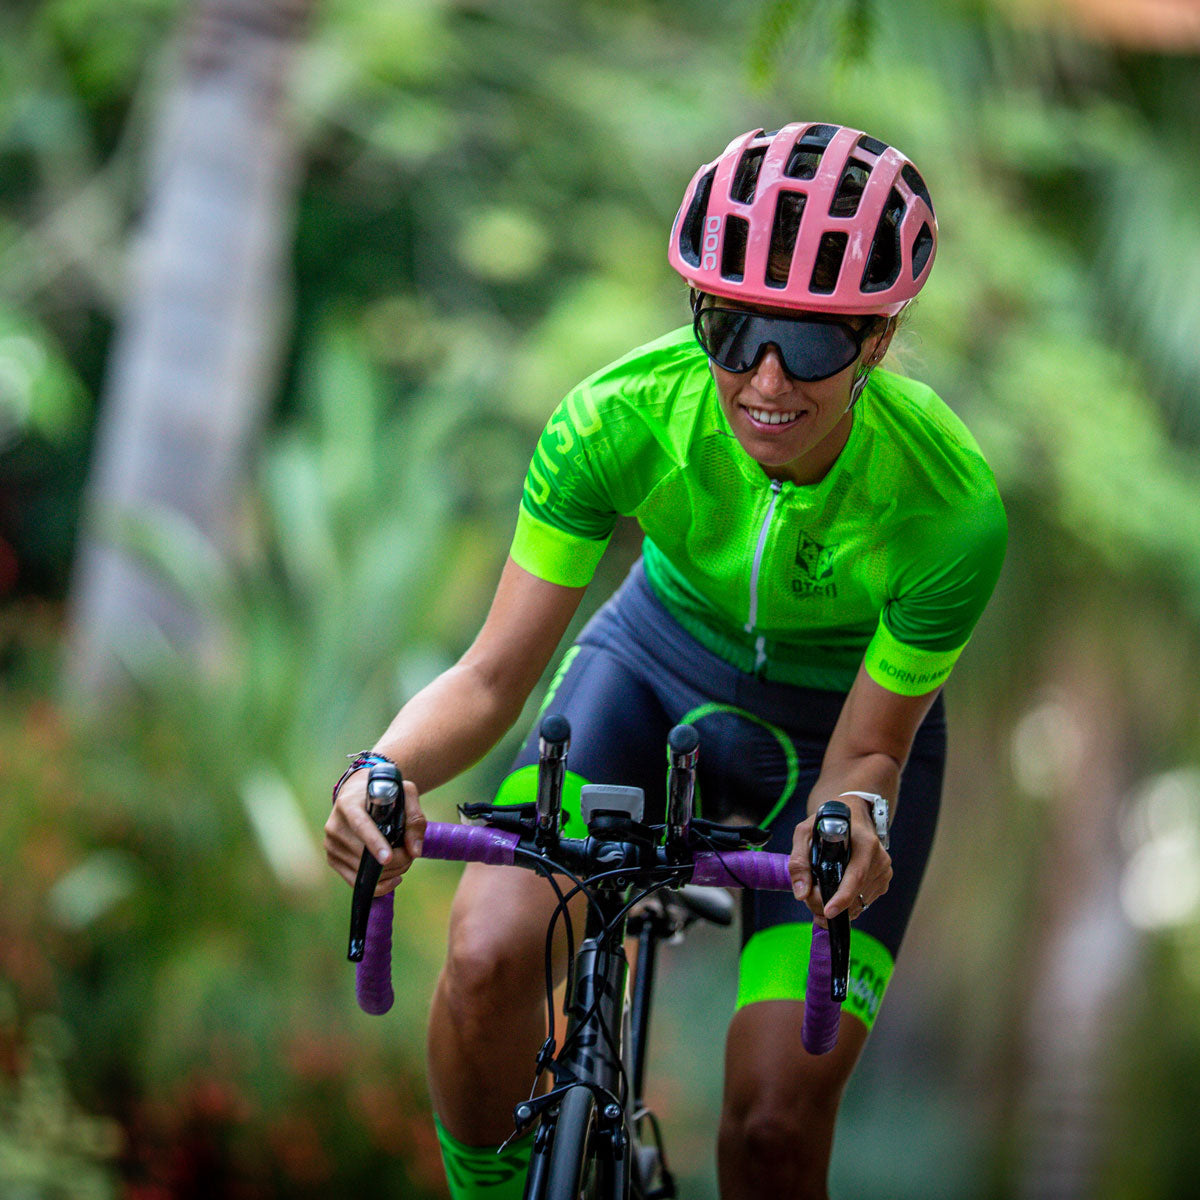 Opiniones Summer '20 - Maillot Ciclismo Mujer